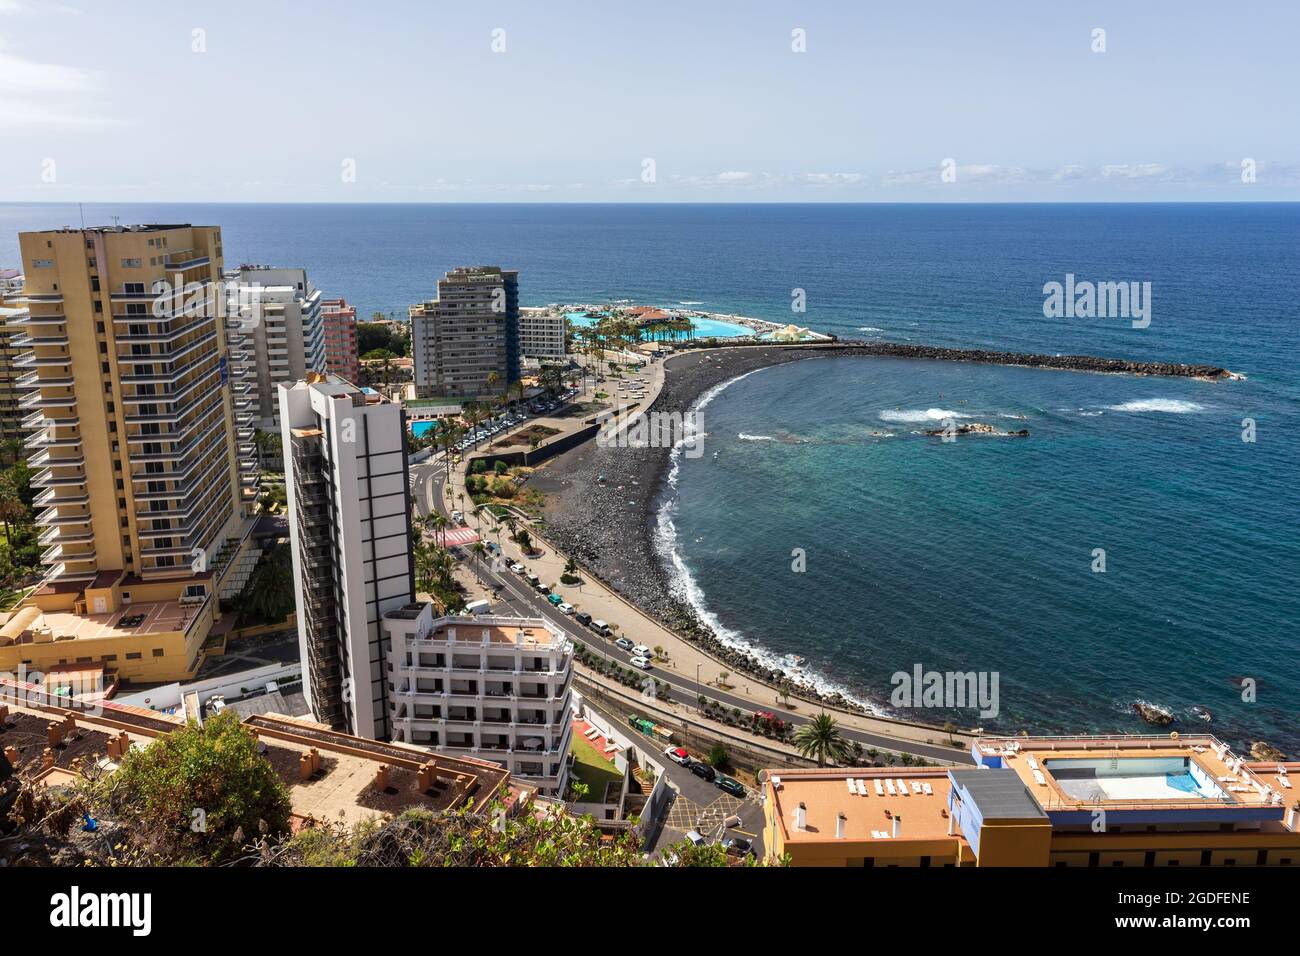 A view on the city from a height of observation deck: Mirador La Paz.  Puerto de la Cruz, Tenerife, Canary Islands, Spain. Stock Photo